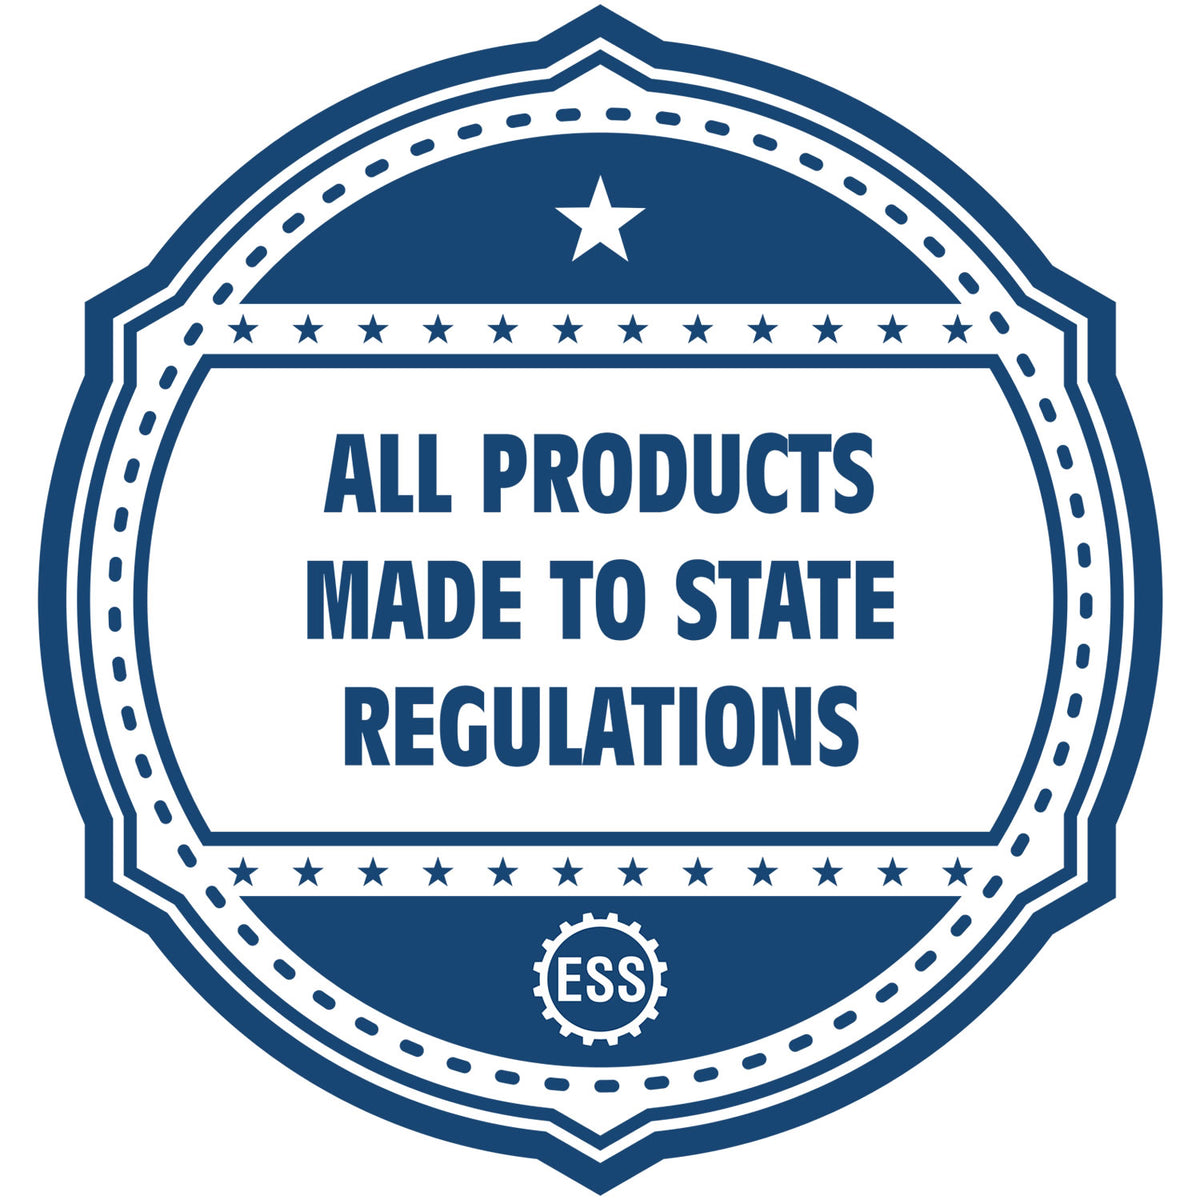 An icon or badge element for the Self-Inking Vermont Landscape Architect Stamp showing that this product is made in compliance with state regulations.